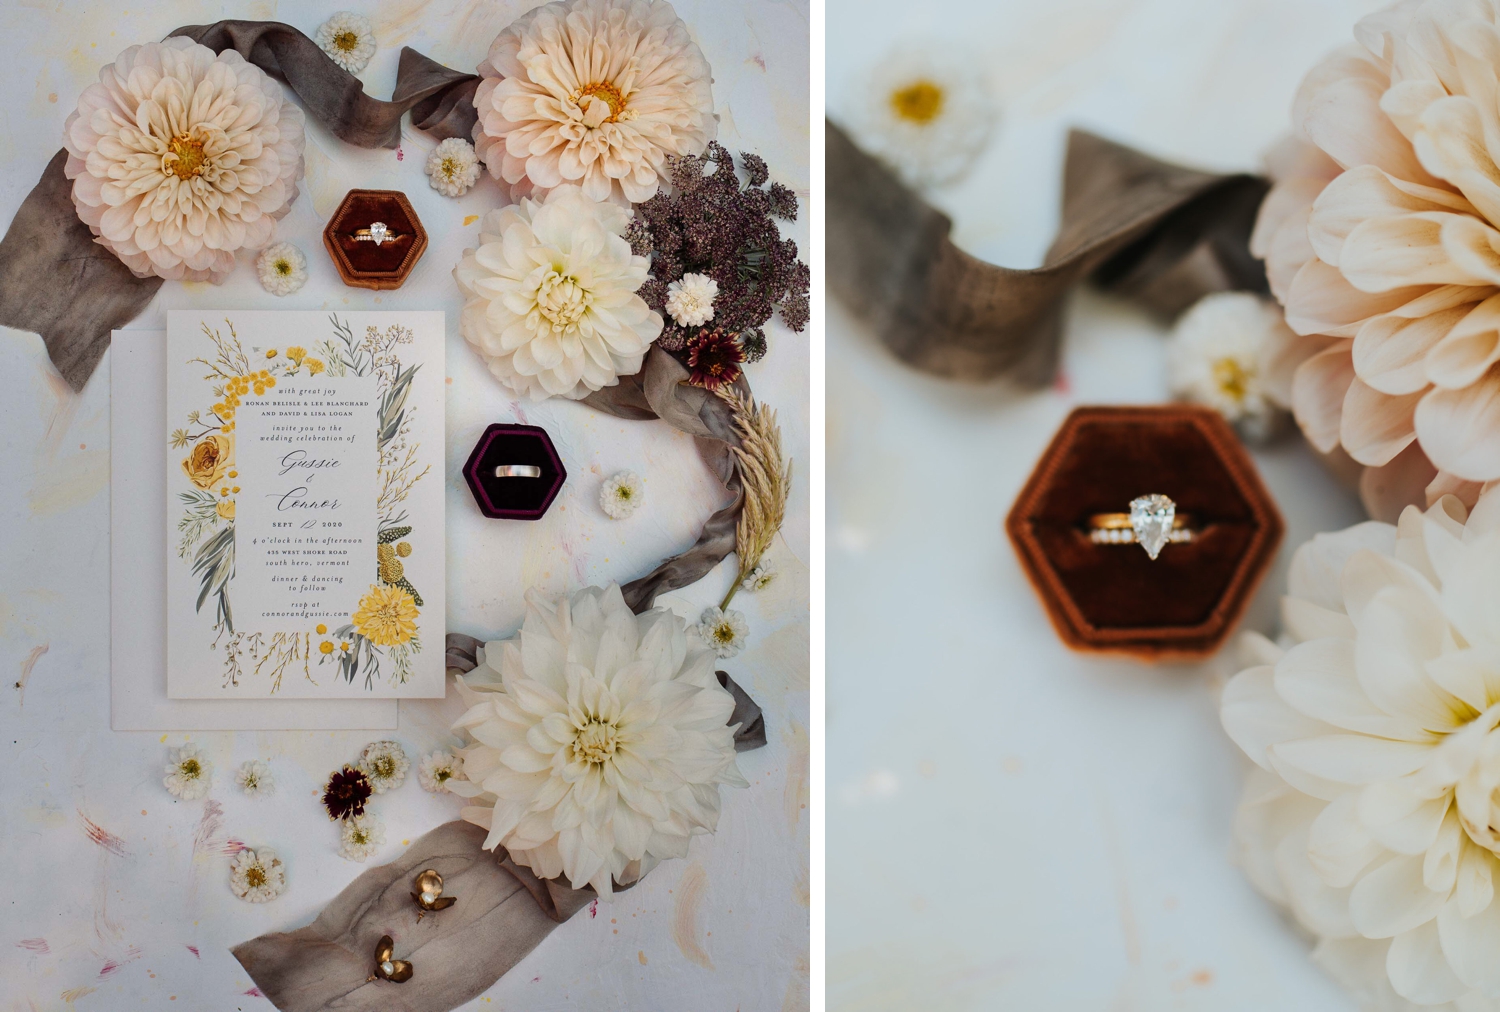 Wedding invitations from Minted, with flowers by Lily Belisle